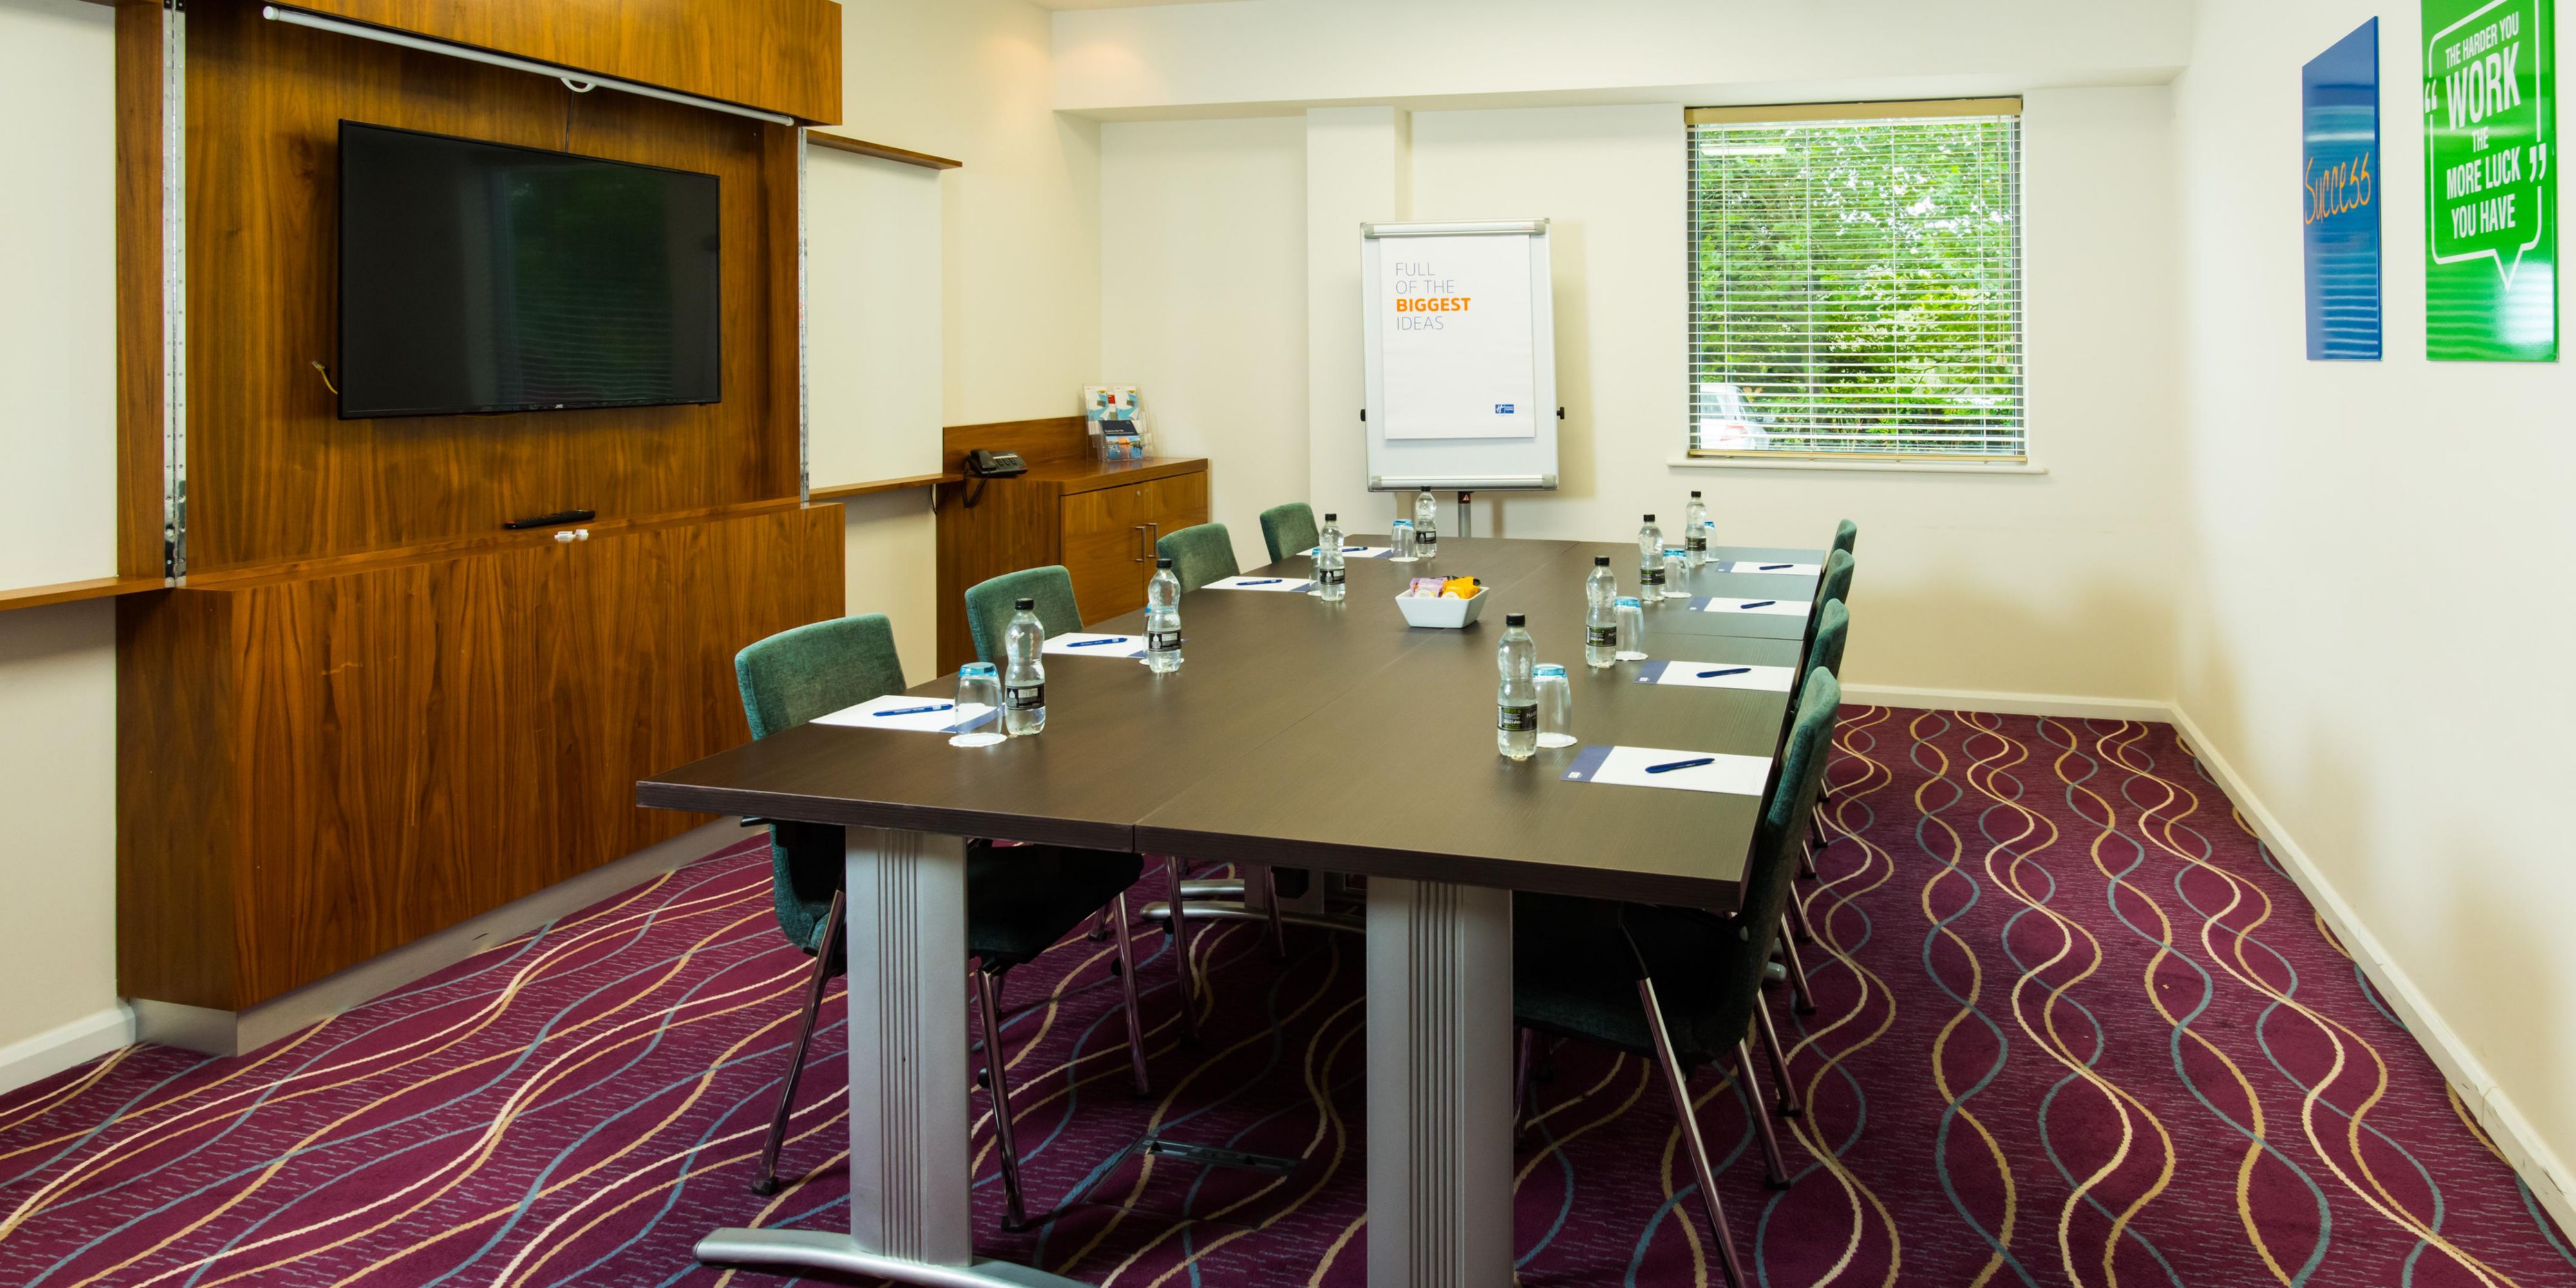 If zoom-fatigue is setting in and you know the value of face-to-face meetings, Holiday Inn Express Tamworth provides modern conference rooms, lunches and accommodation for those travelling from further afield.